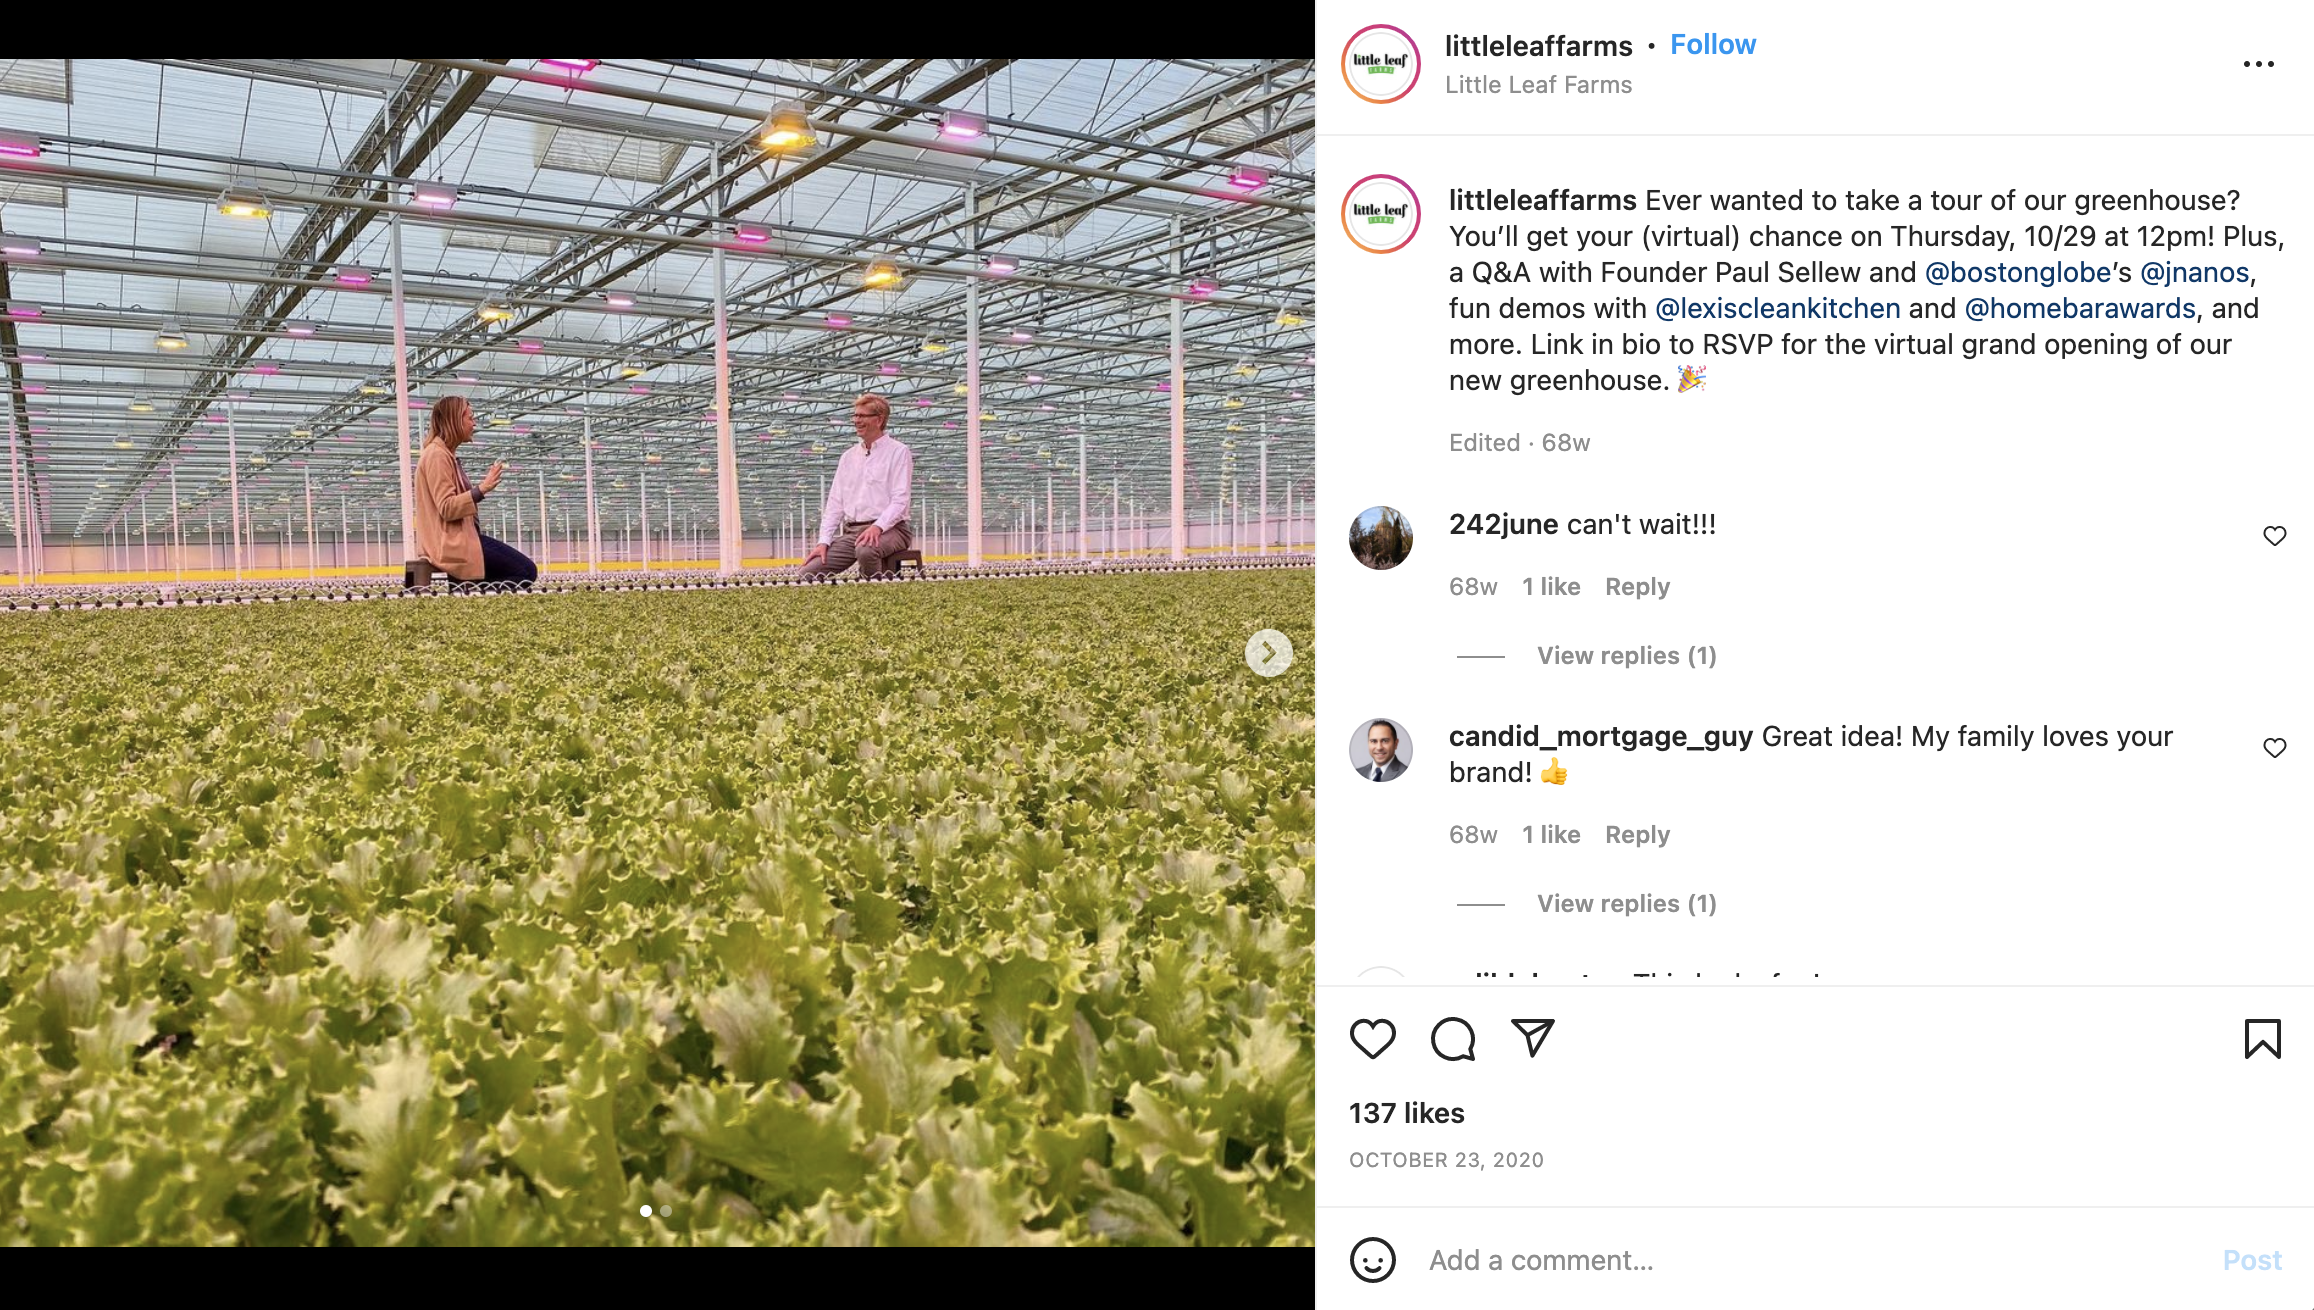 Instagram post to announce Little Leaf's virtual tour in celebration of its grand opening